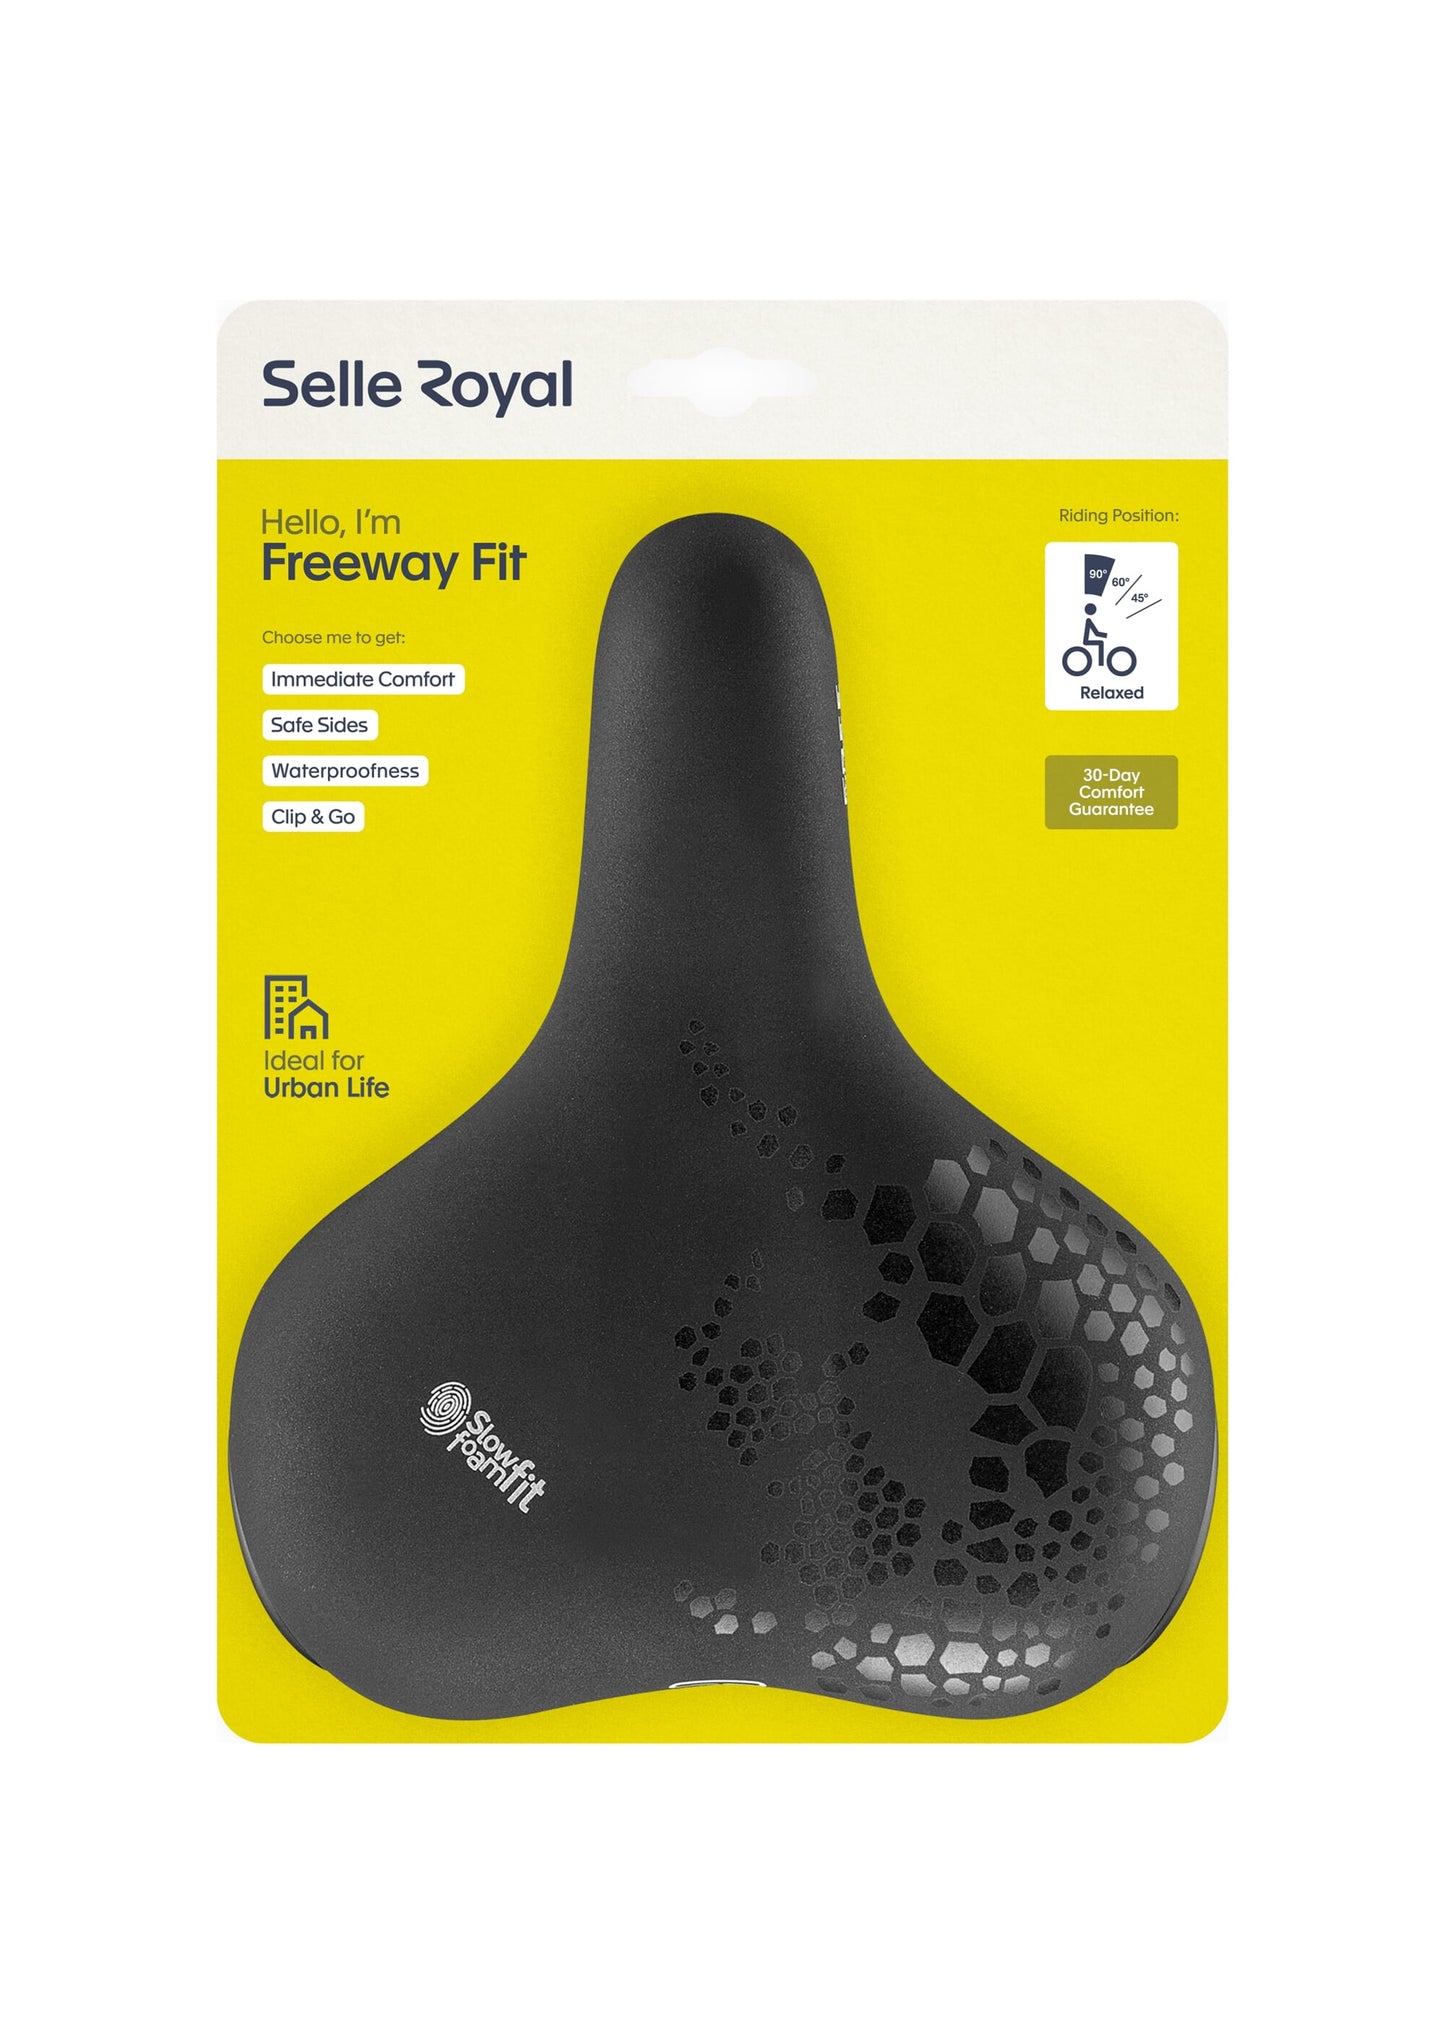 Saddle Selle Royal Freeway Fit Related - Urban Life